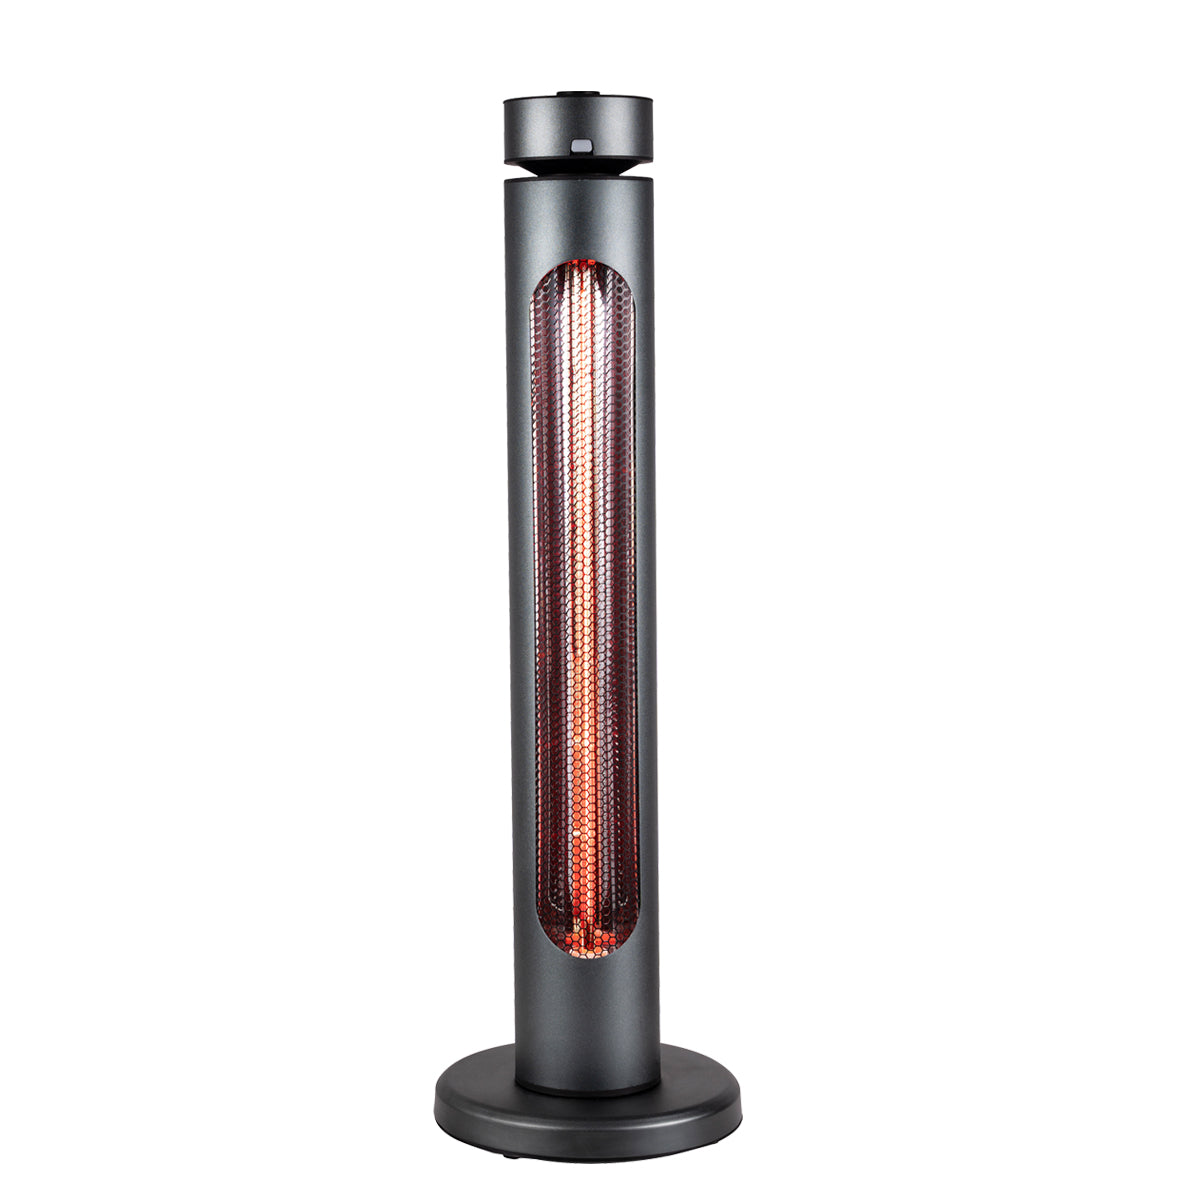 Ener-J Portable Infrared Heater 8 Heat Settings, Gren and Red colour Knob, IP65 - West Midland Electrics | CCTV & Electrical Wholesaler